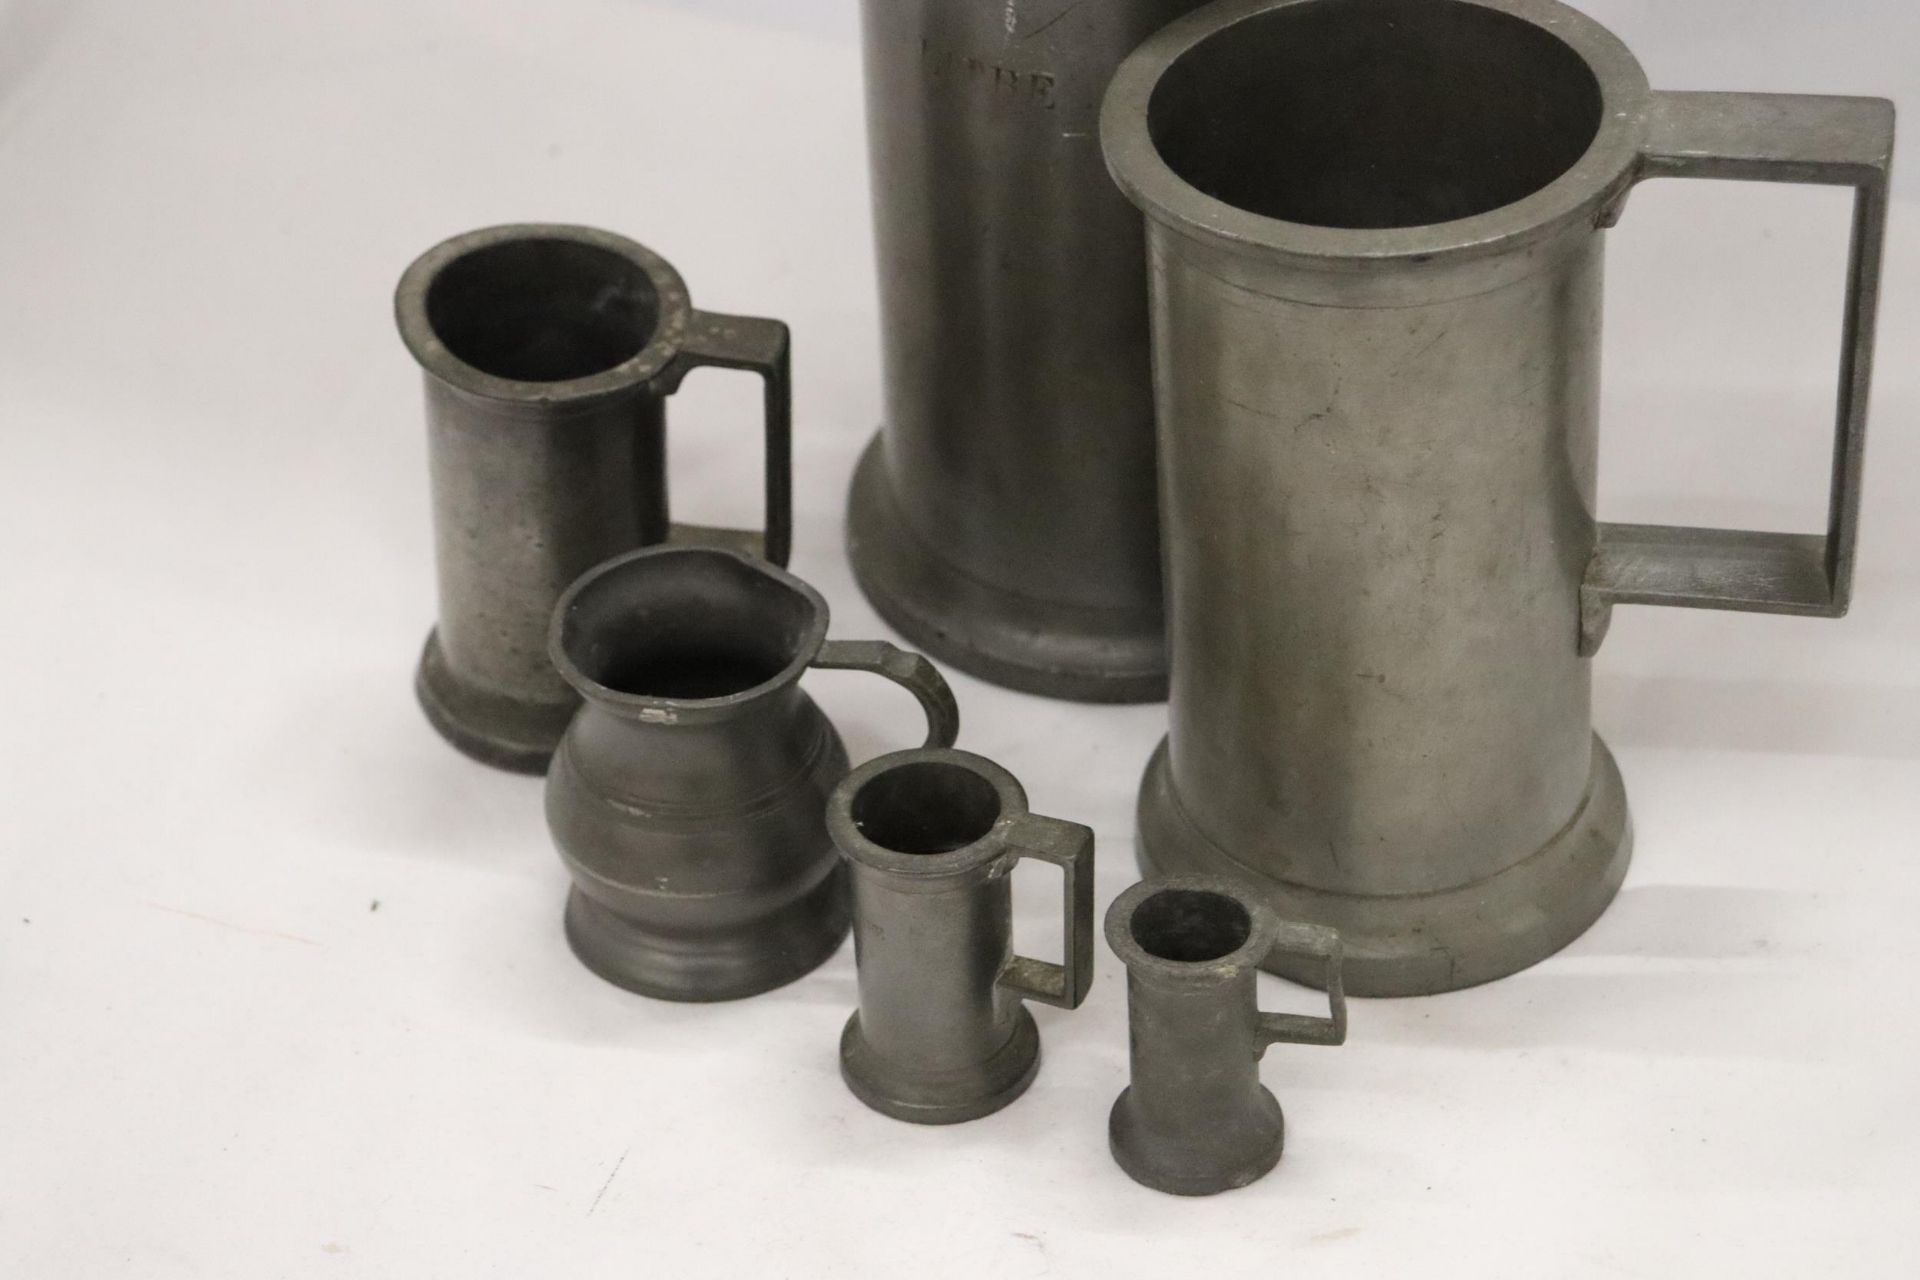 A COLLECTION OF ANTIQUE FRENCH PEWTER TANKARDS OF VARYING SIZES - 6 IN TOTAL - Image 10 of 10